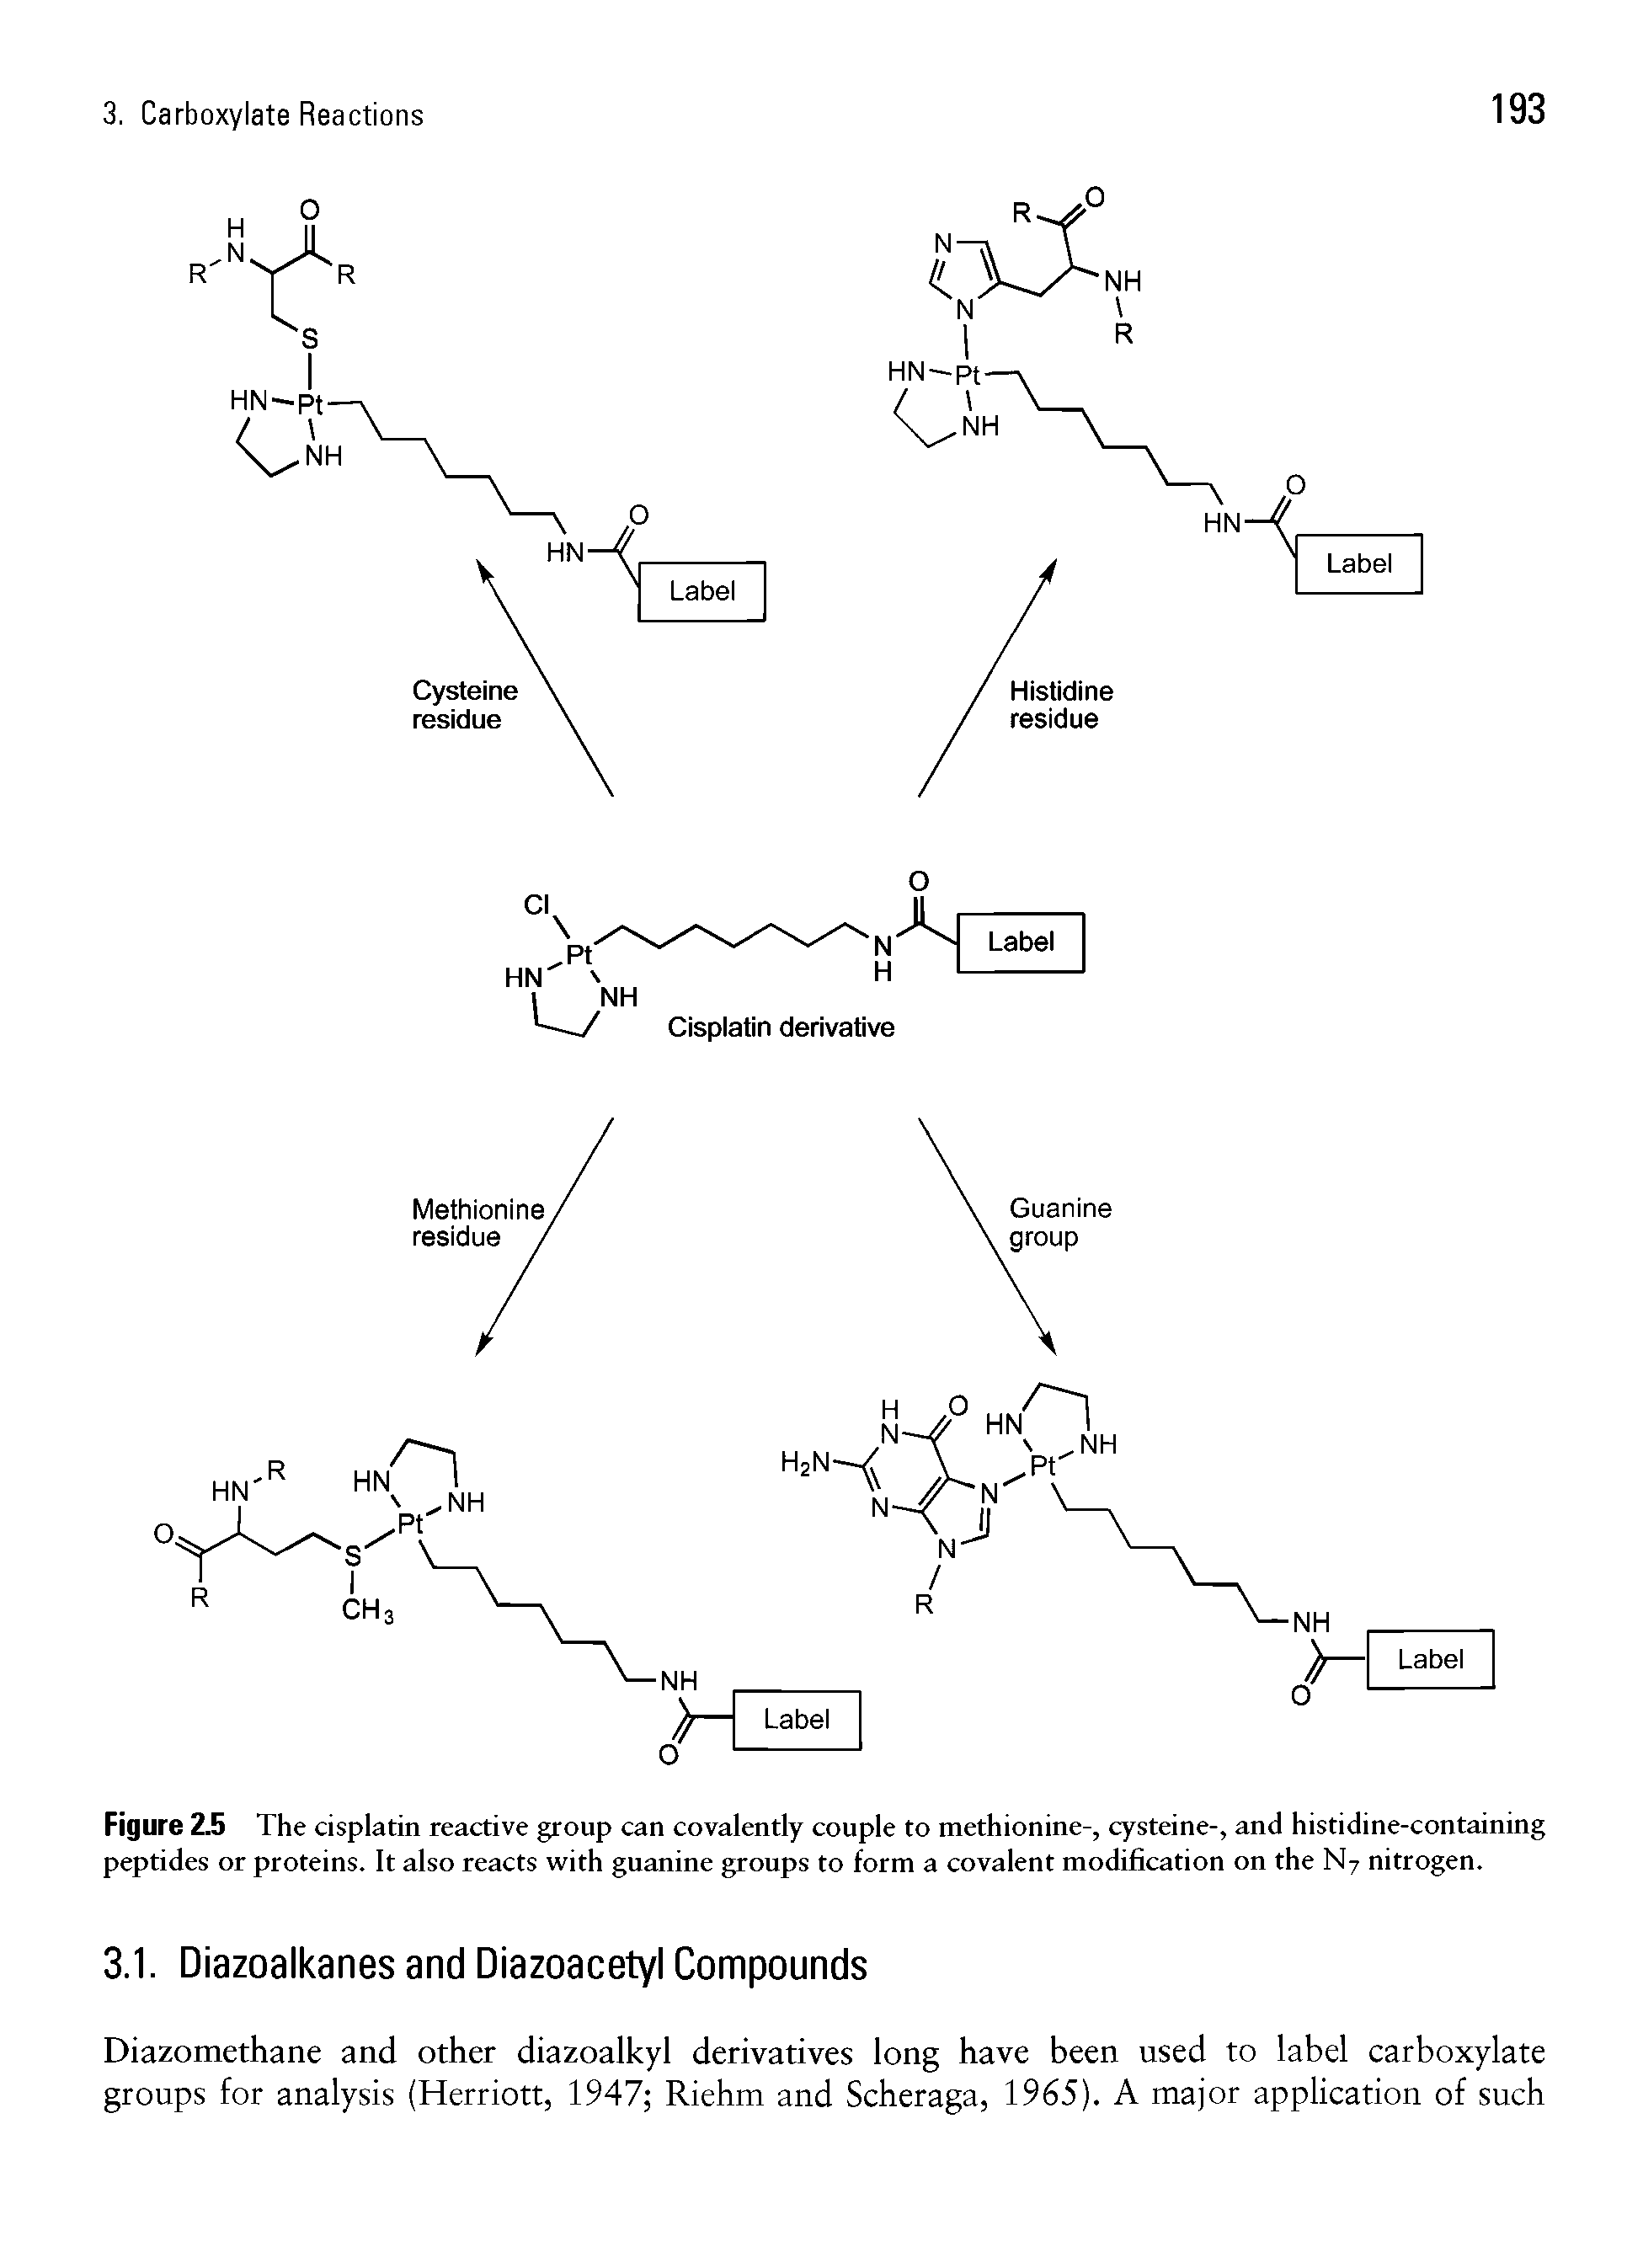 Figure 2.5 The cisplatin reactive group can covalently couple to methionine-, cysteine-, and histidine-containing peptides or proteins. It also reacts with guanine groups to form a covalent modification on the N7 nitrogen.